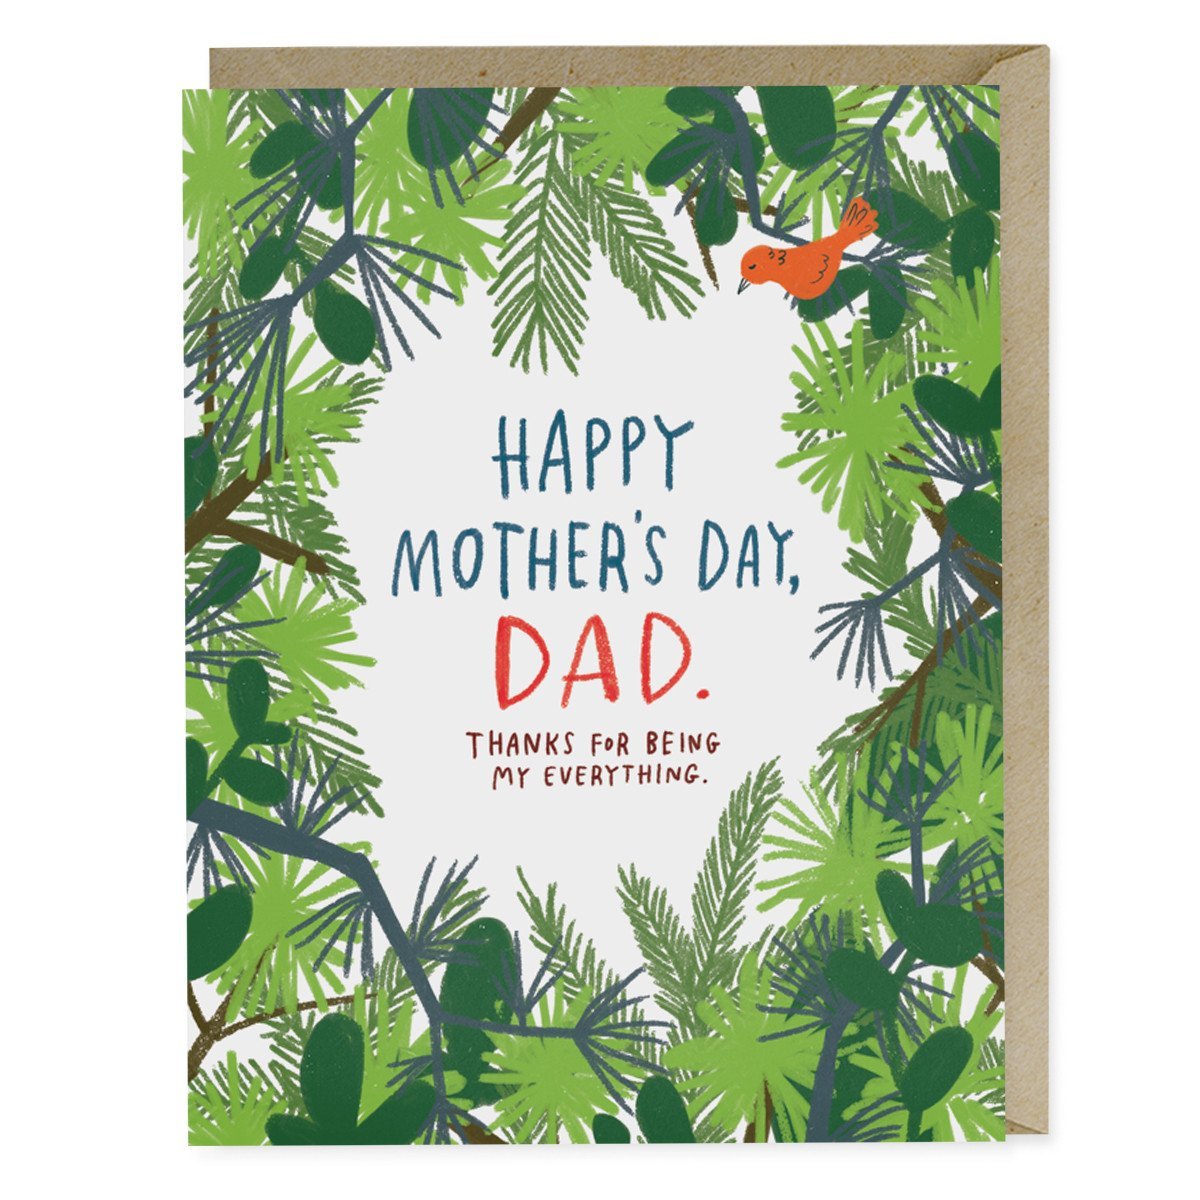 Mother's Day, Dad Card